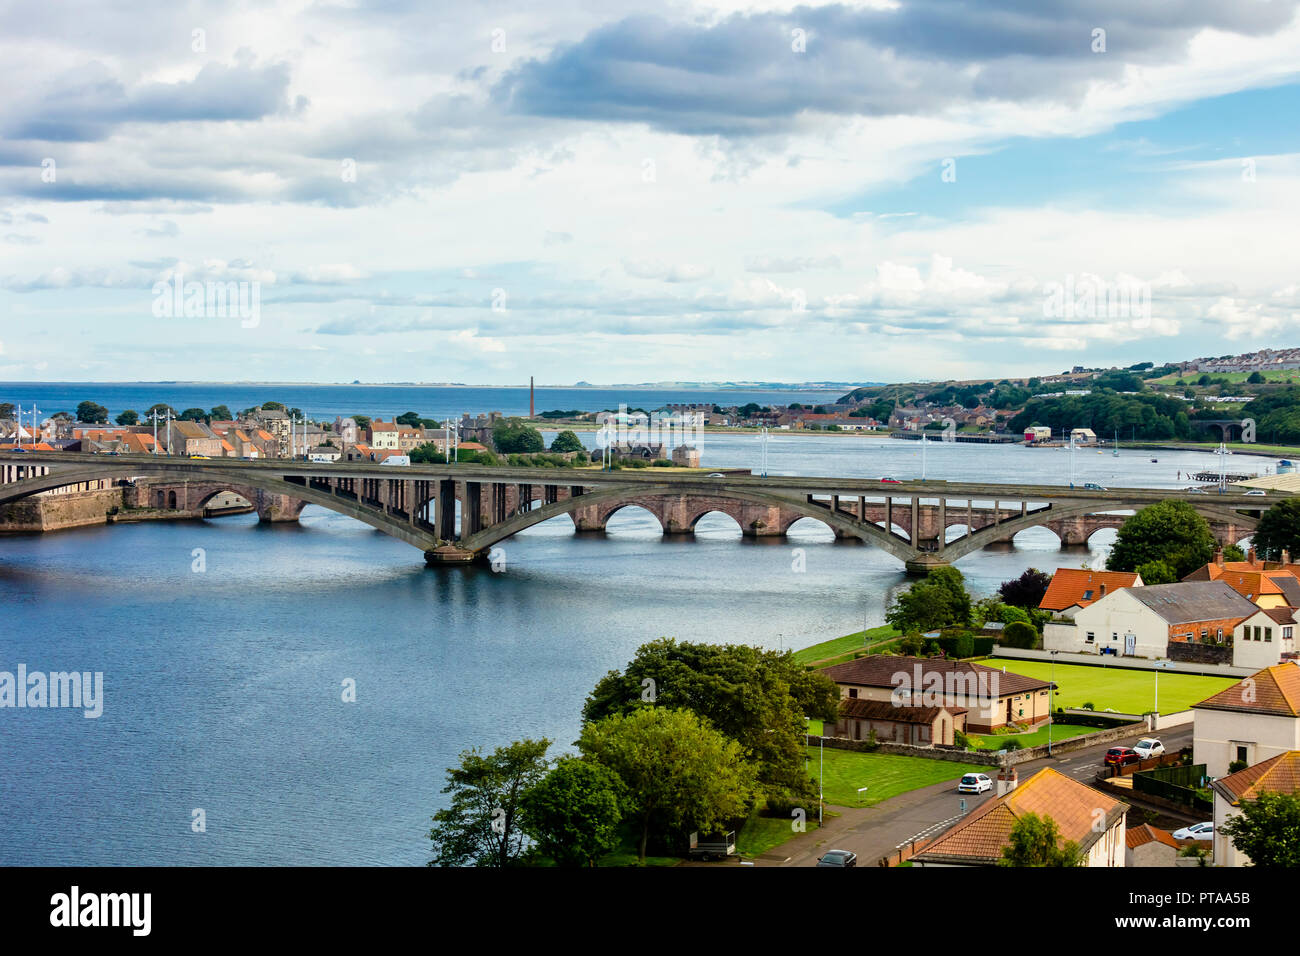 Berwick-upon-Tweed, UK - August 25 2018: aerial urban cityscape of Berwick city centre architecture featuring Royal Tweed Bridge and River Tweed Stock Photo